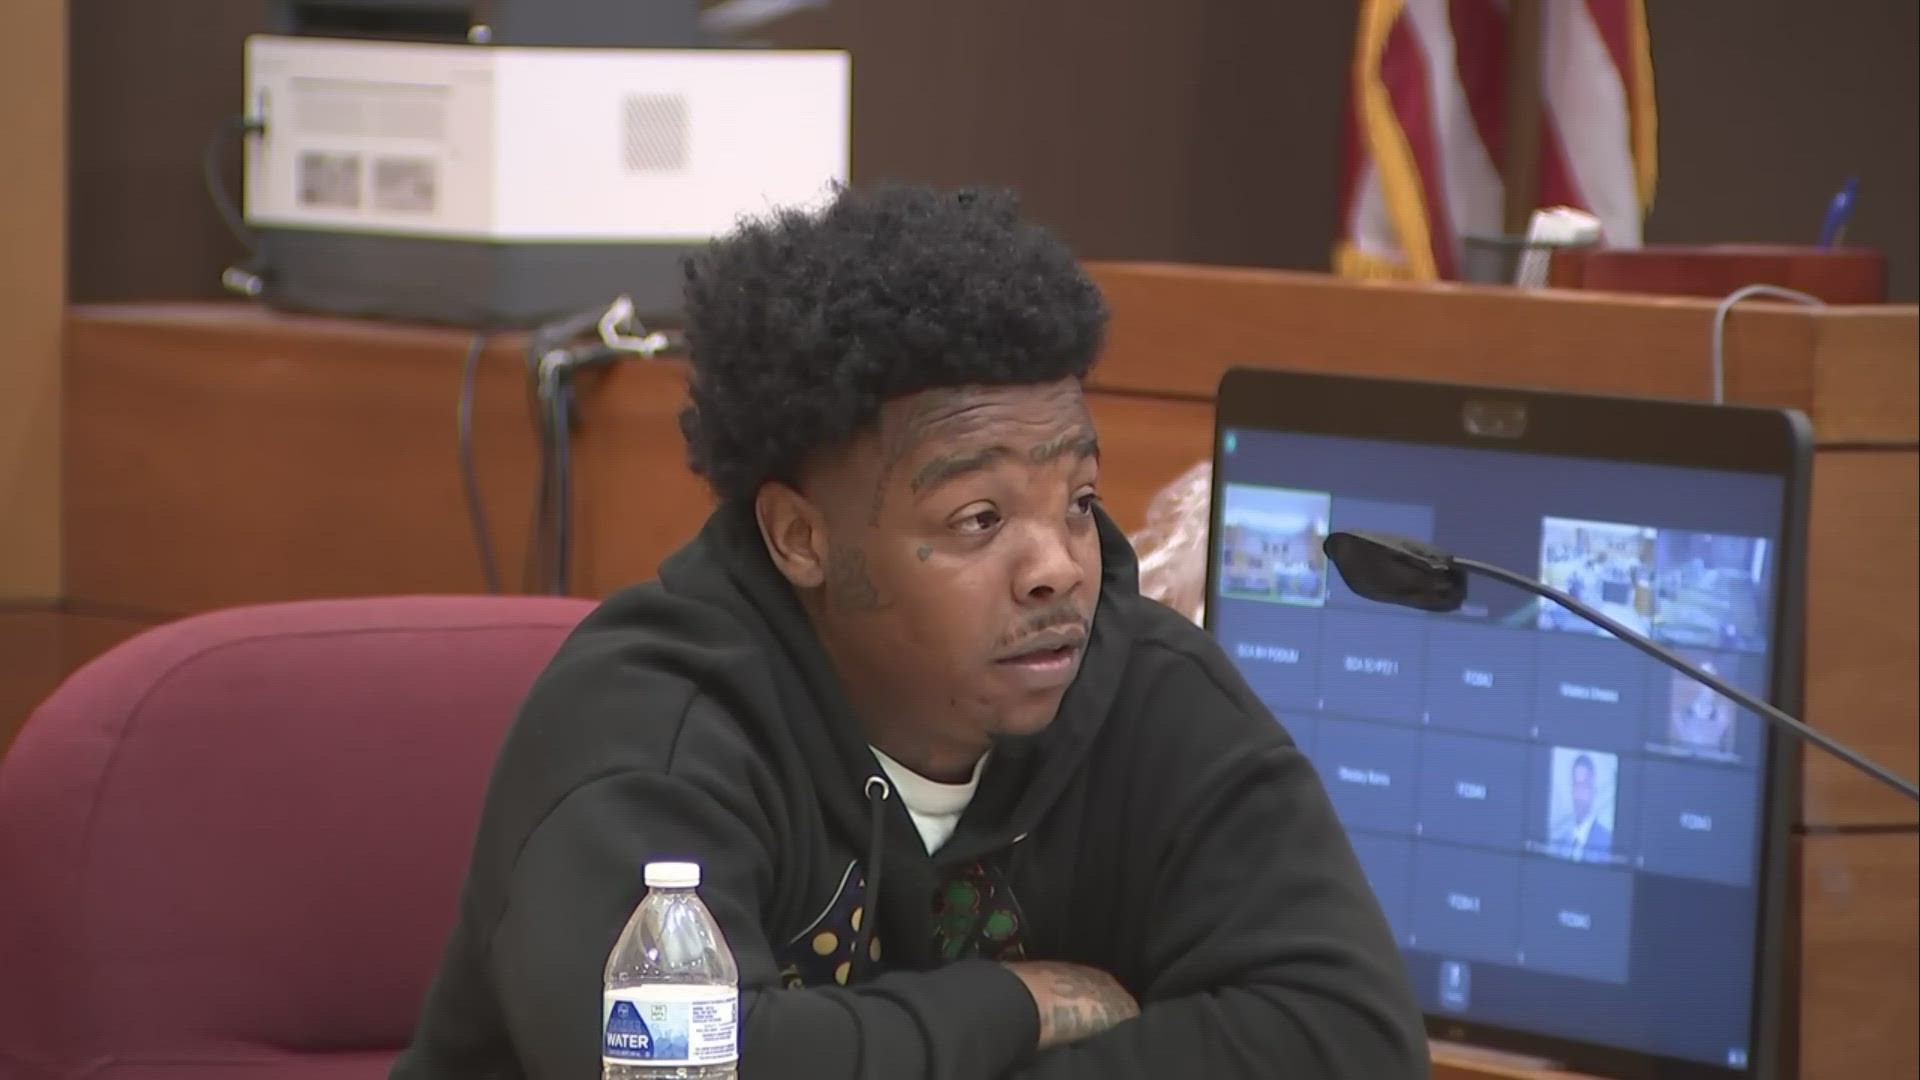 The prosecution kept referring to Walter "DK" Murphy's plea agreement, grilling him about his involvement in the alleged gang and the crime he possibly committed.